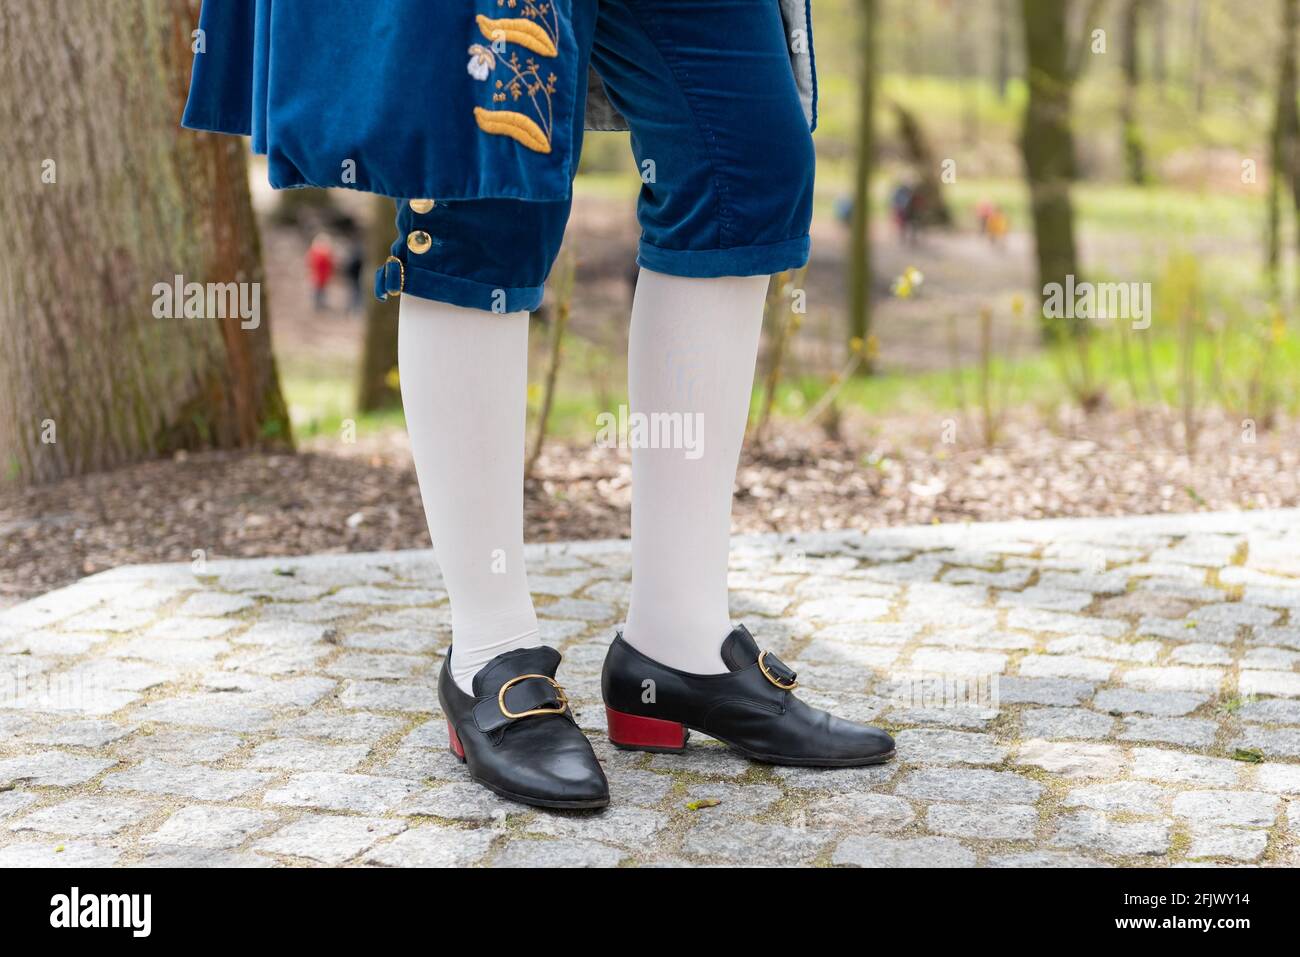 Details of a man's dress in a baroque costume. White stockings and black shoes, golden buttons, decorative hems. A man standing on a cobbled walkway Stock Photo